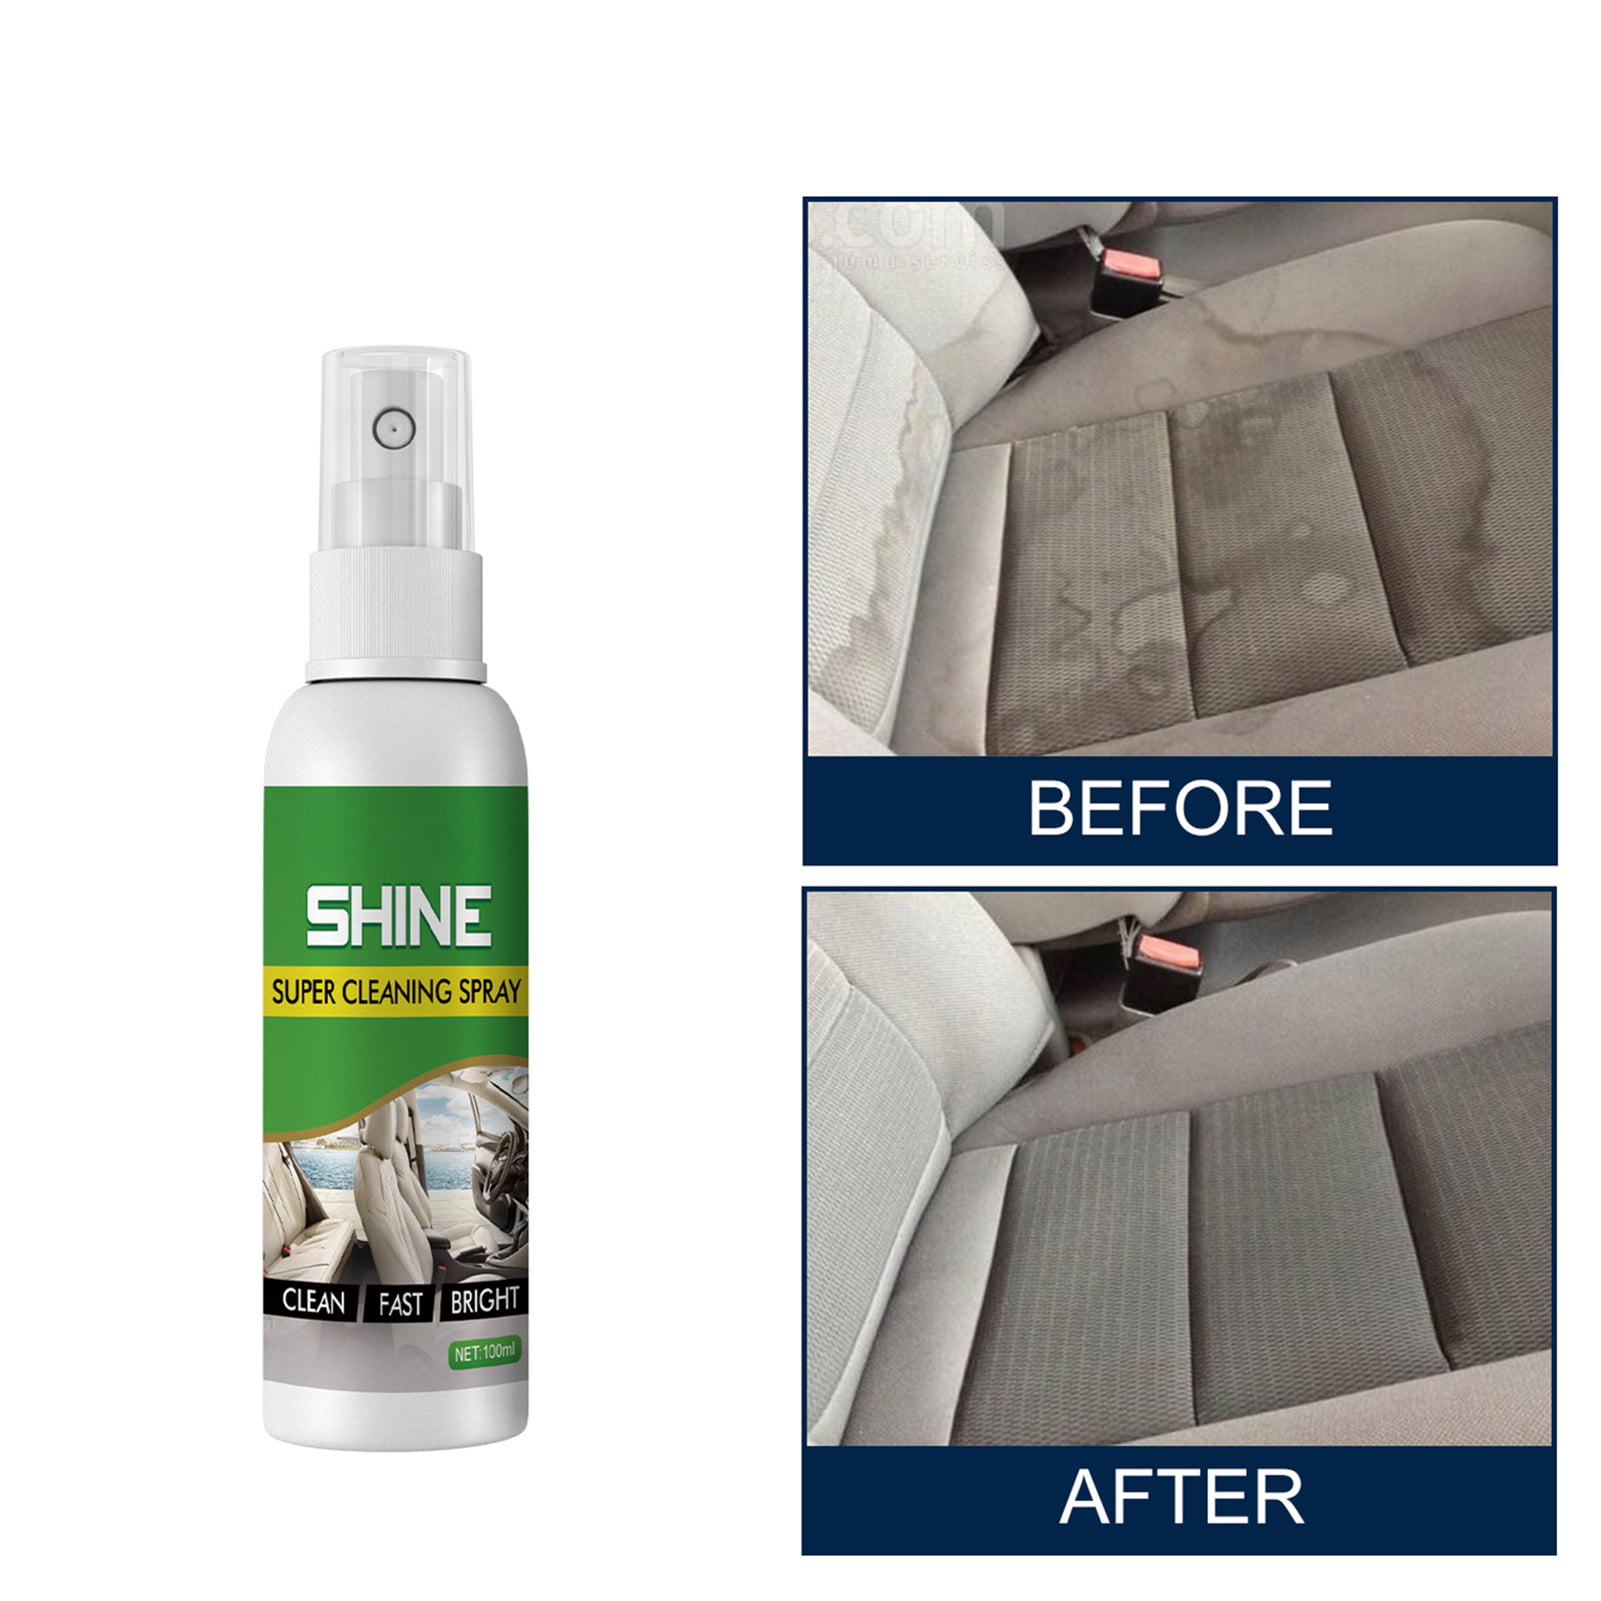 Star Home 60ml Foam Cleaner Non-irritating Without Corrosion No Water  Washing Car Interior Leather Cleaning Supplies for Car 